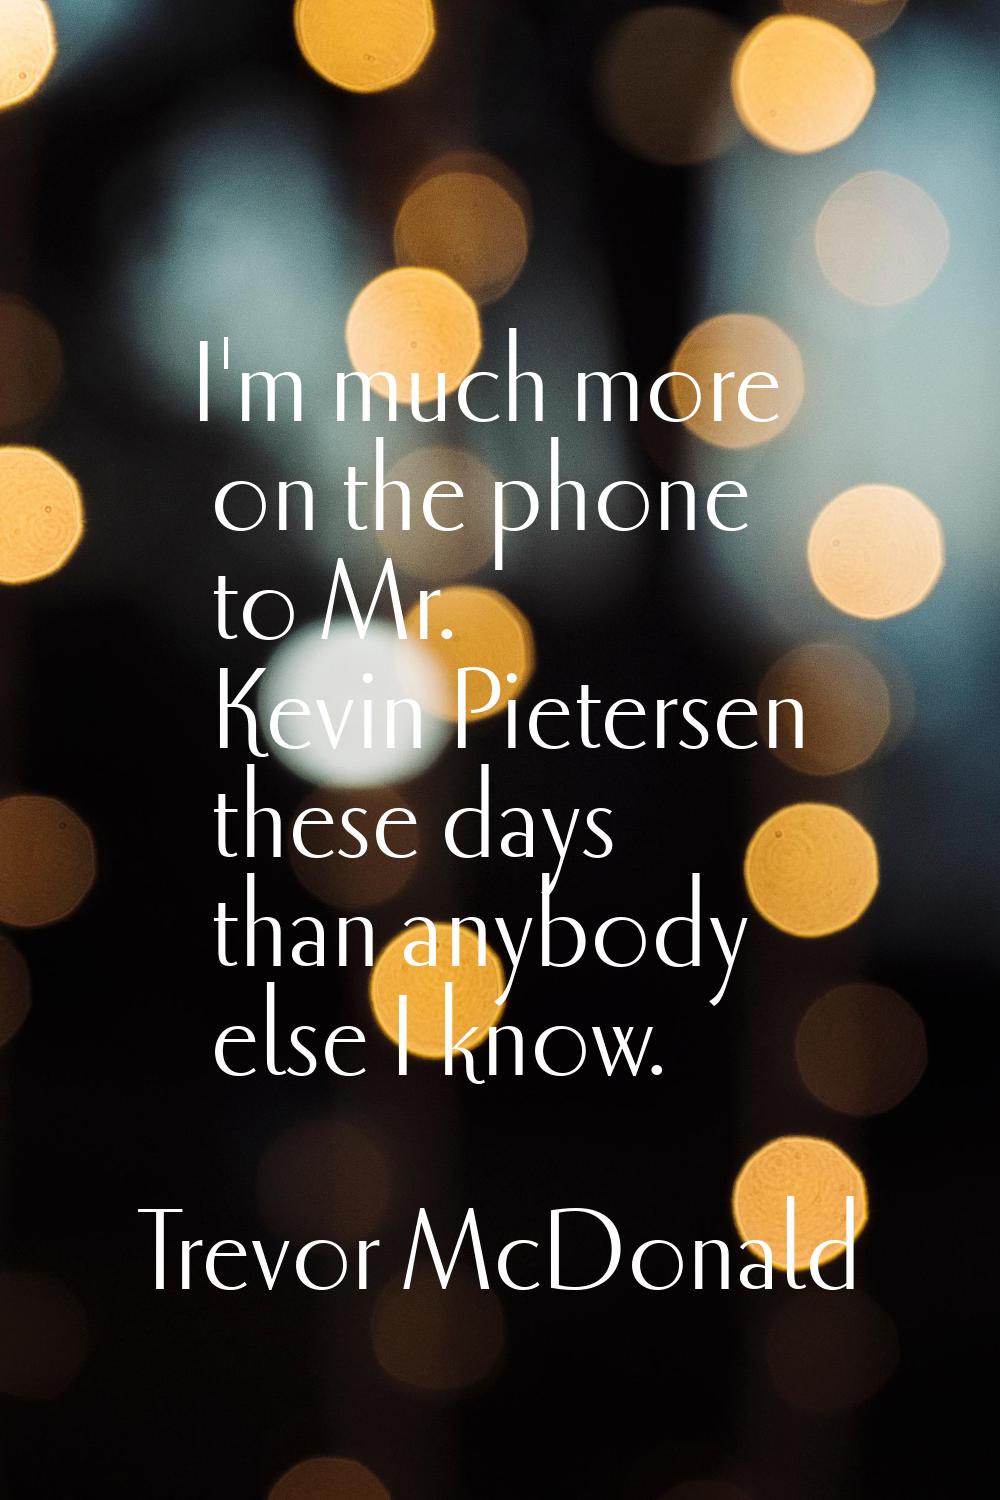 I'm much more on the phone to Mr. Kevin Pietersen these days than anybody else I know.